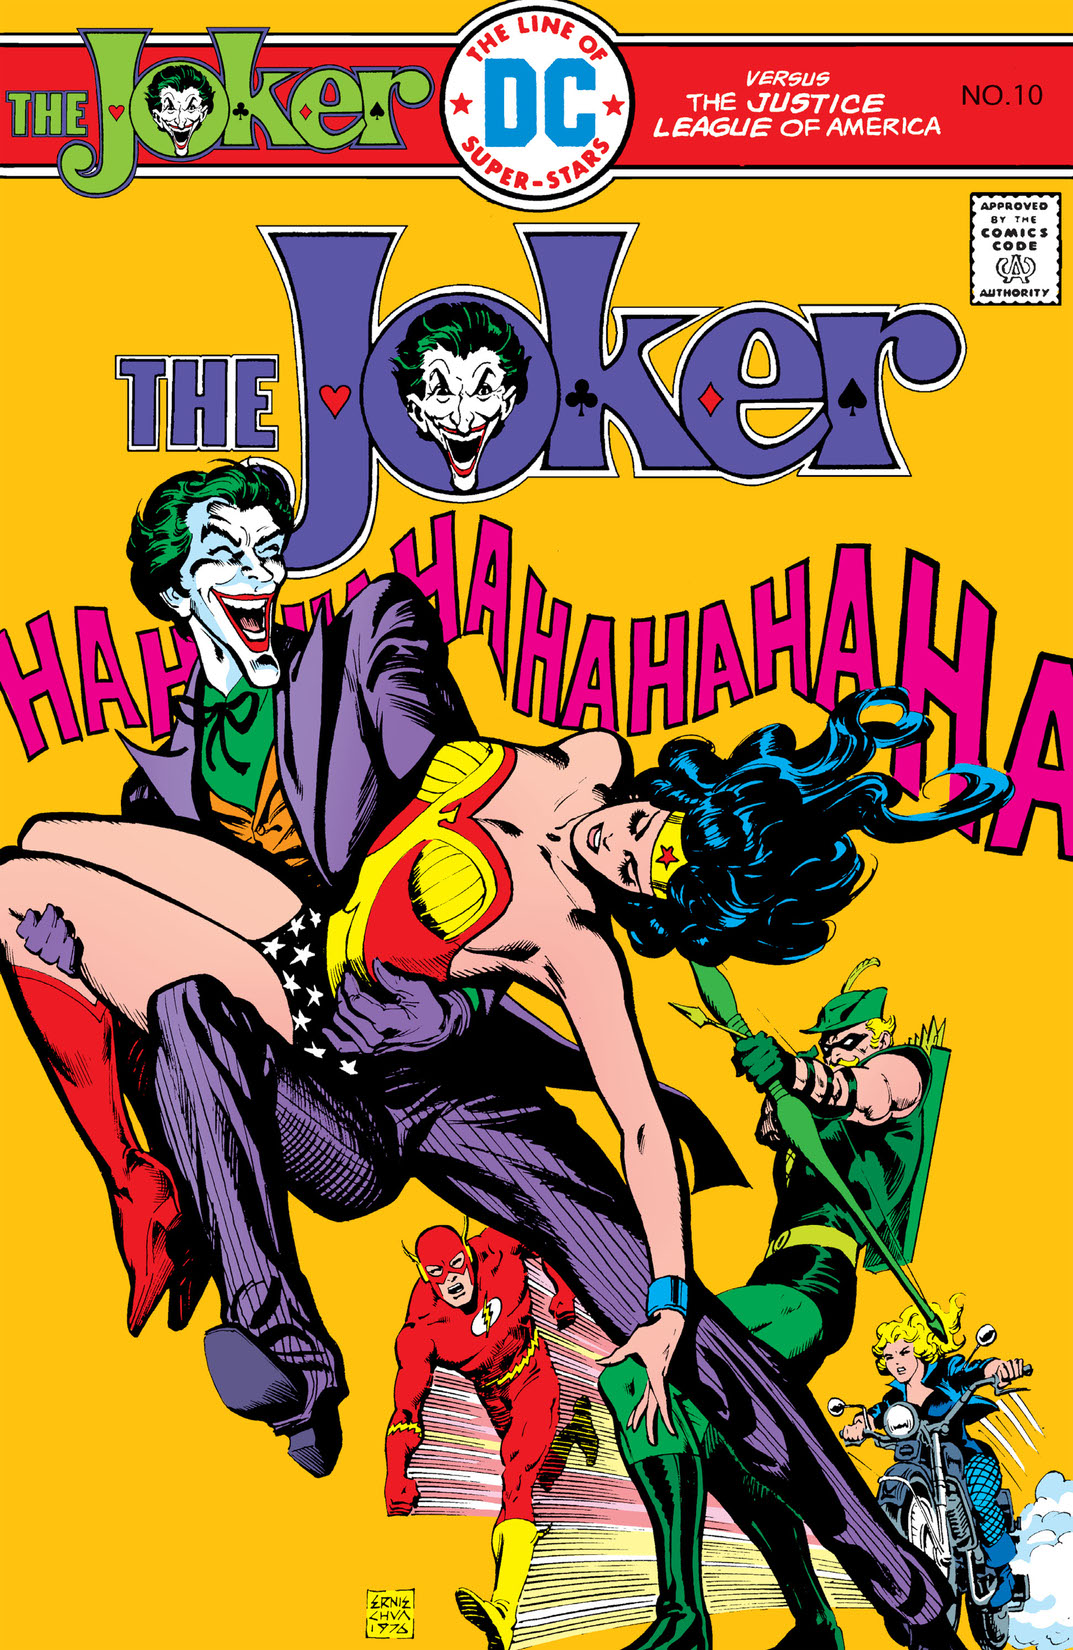 The Joker (1975-) #10 preview images